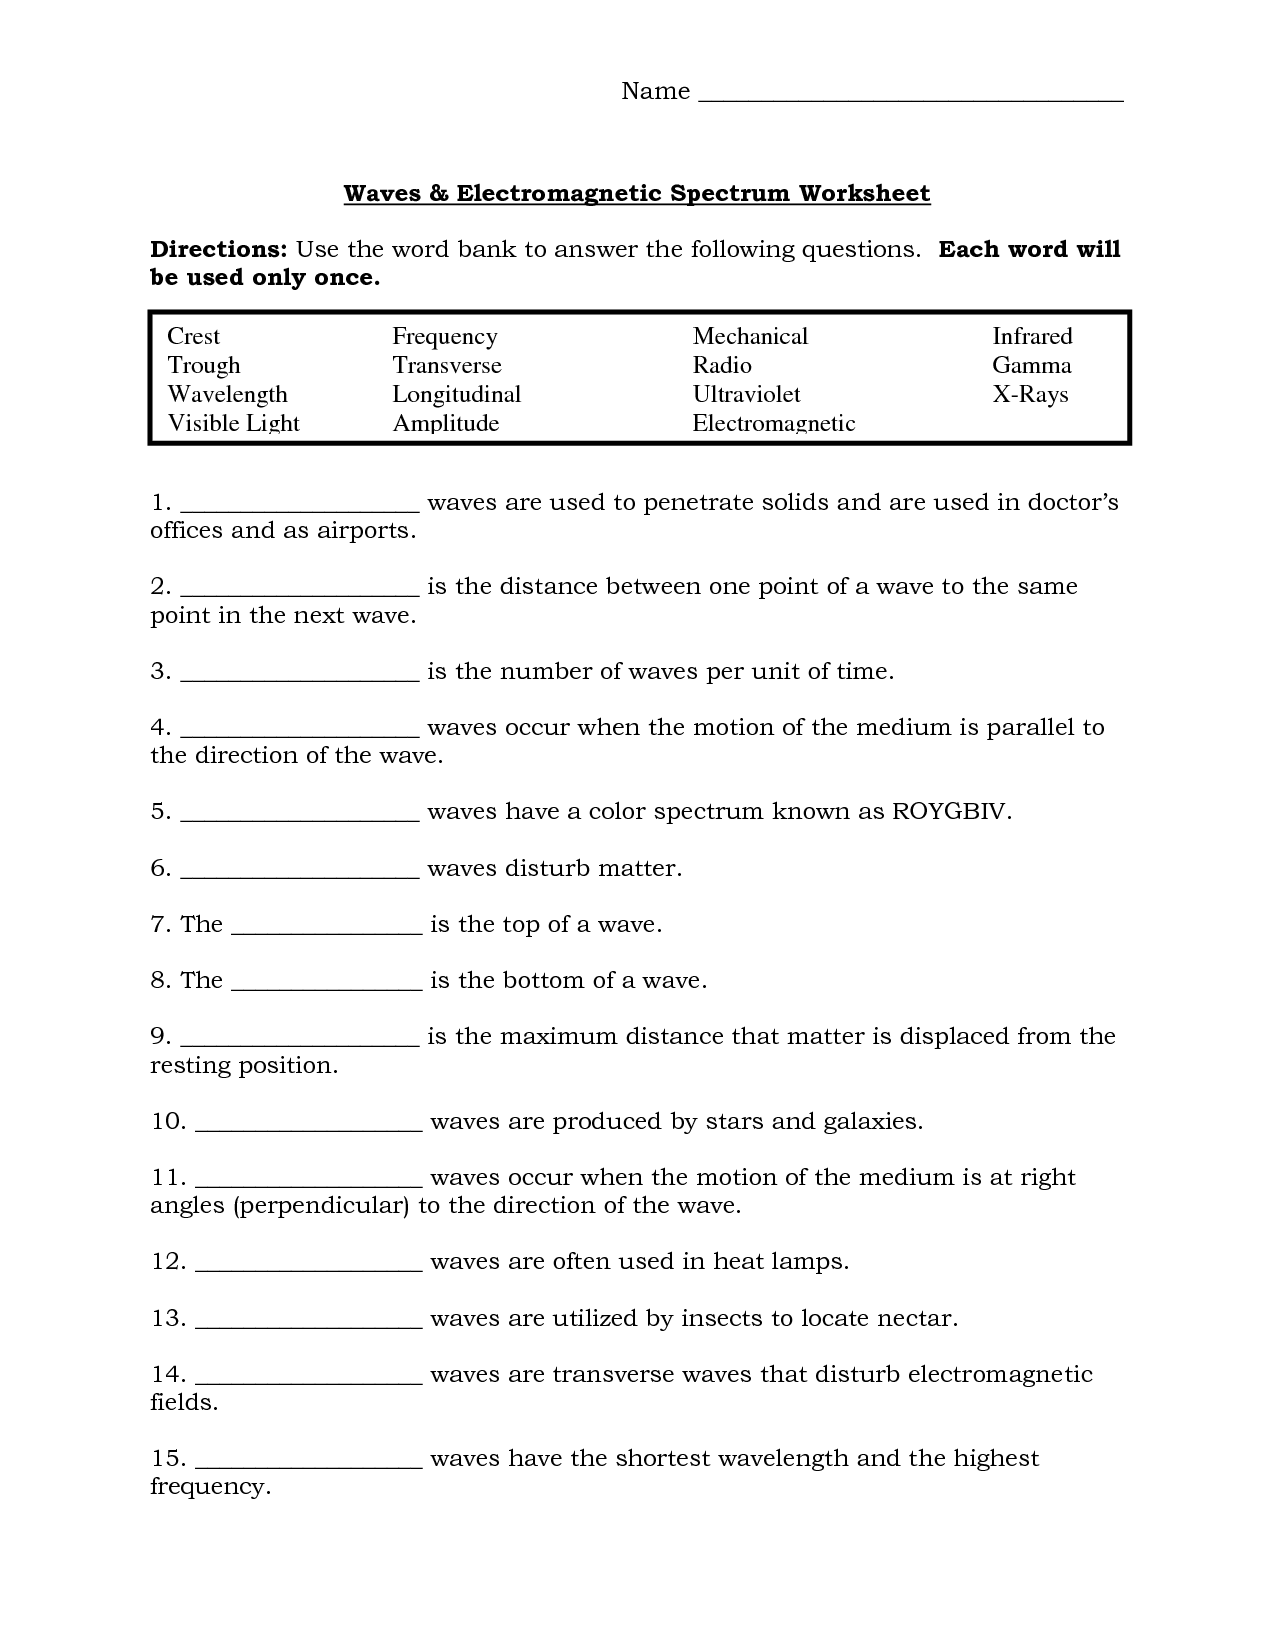 Waves and Electromagnetic Spectrum Worksheet Answers Image